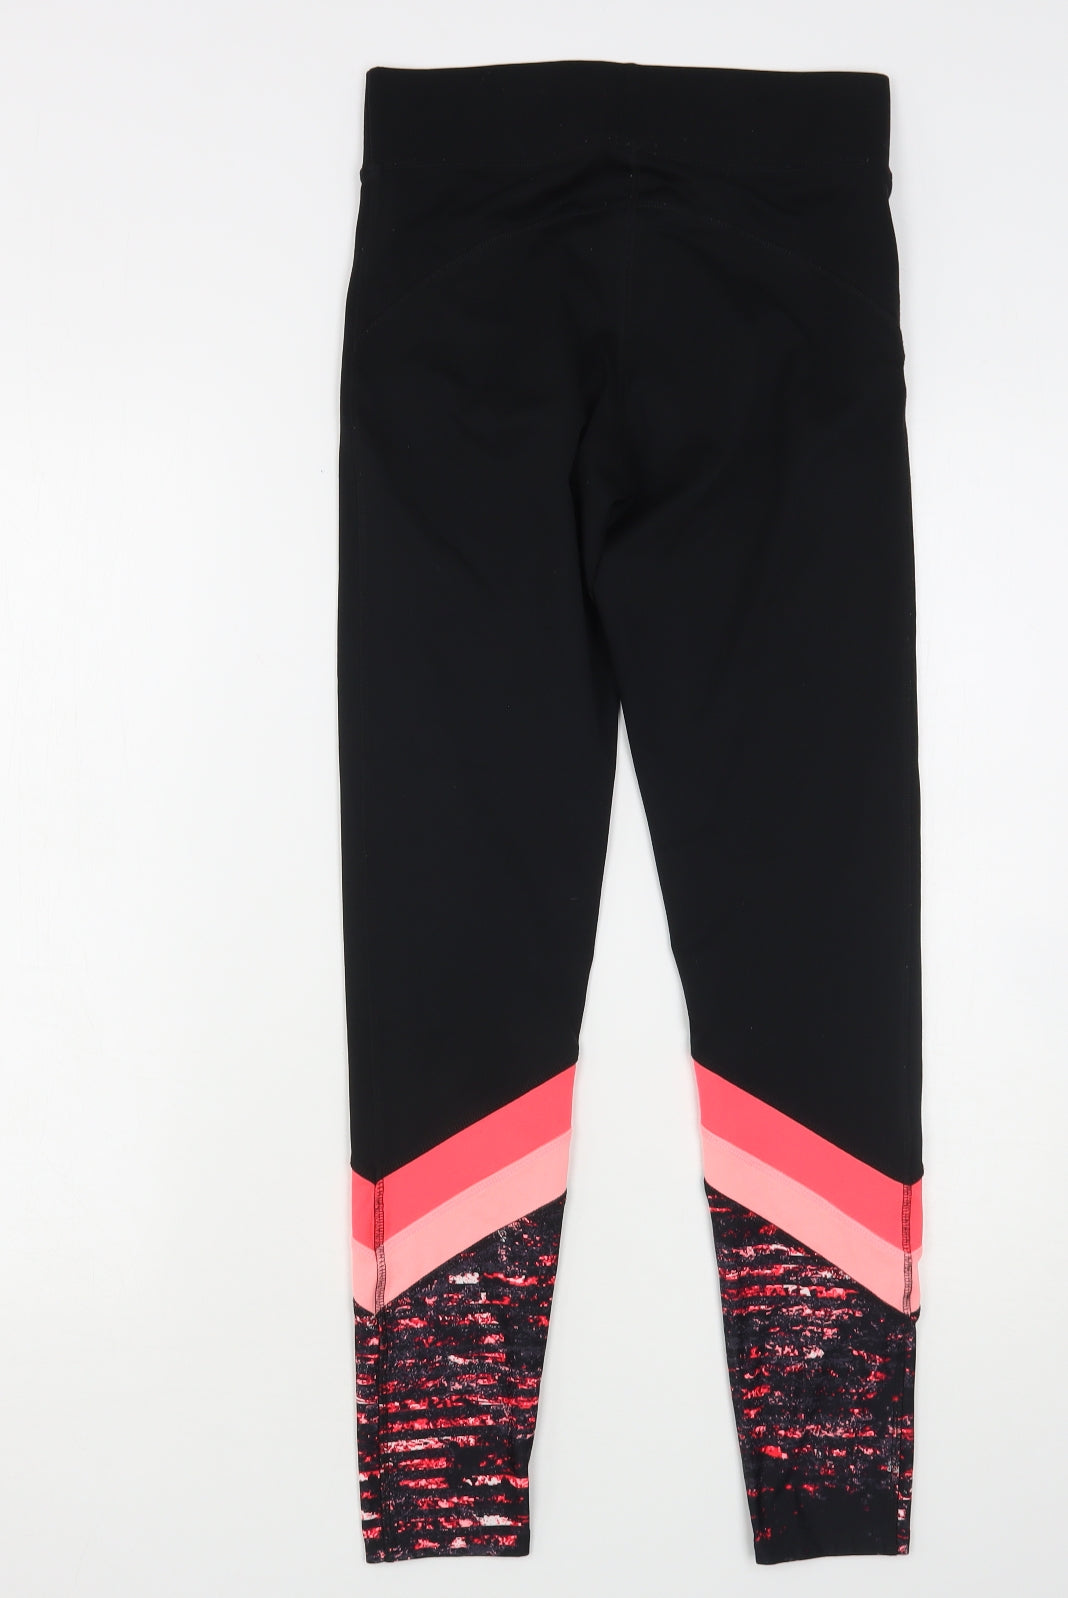 Dunnes Stores Womens Multicoloured Geometric Polyester Compression Leggings Size S L29 in Regular